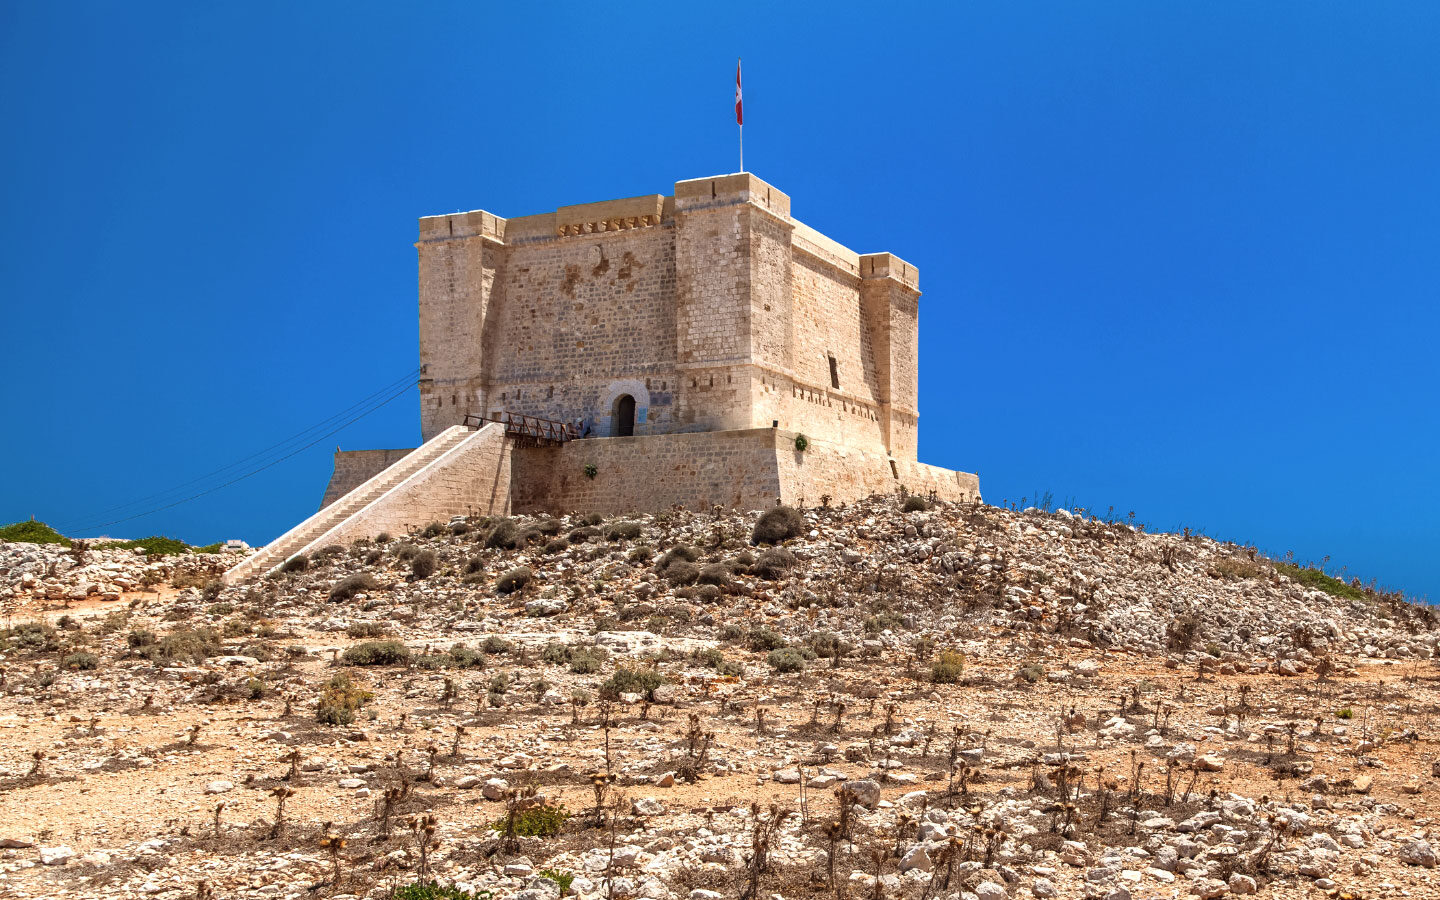 Saint Mary’s Tower in Comino